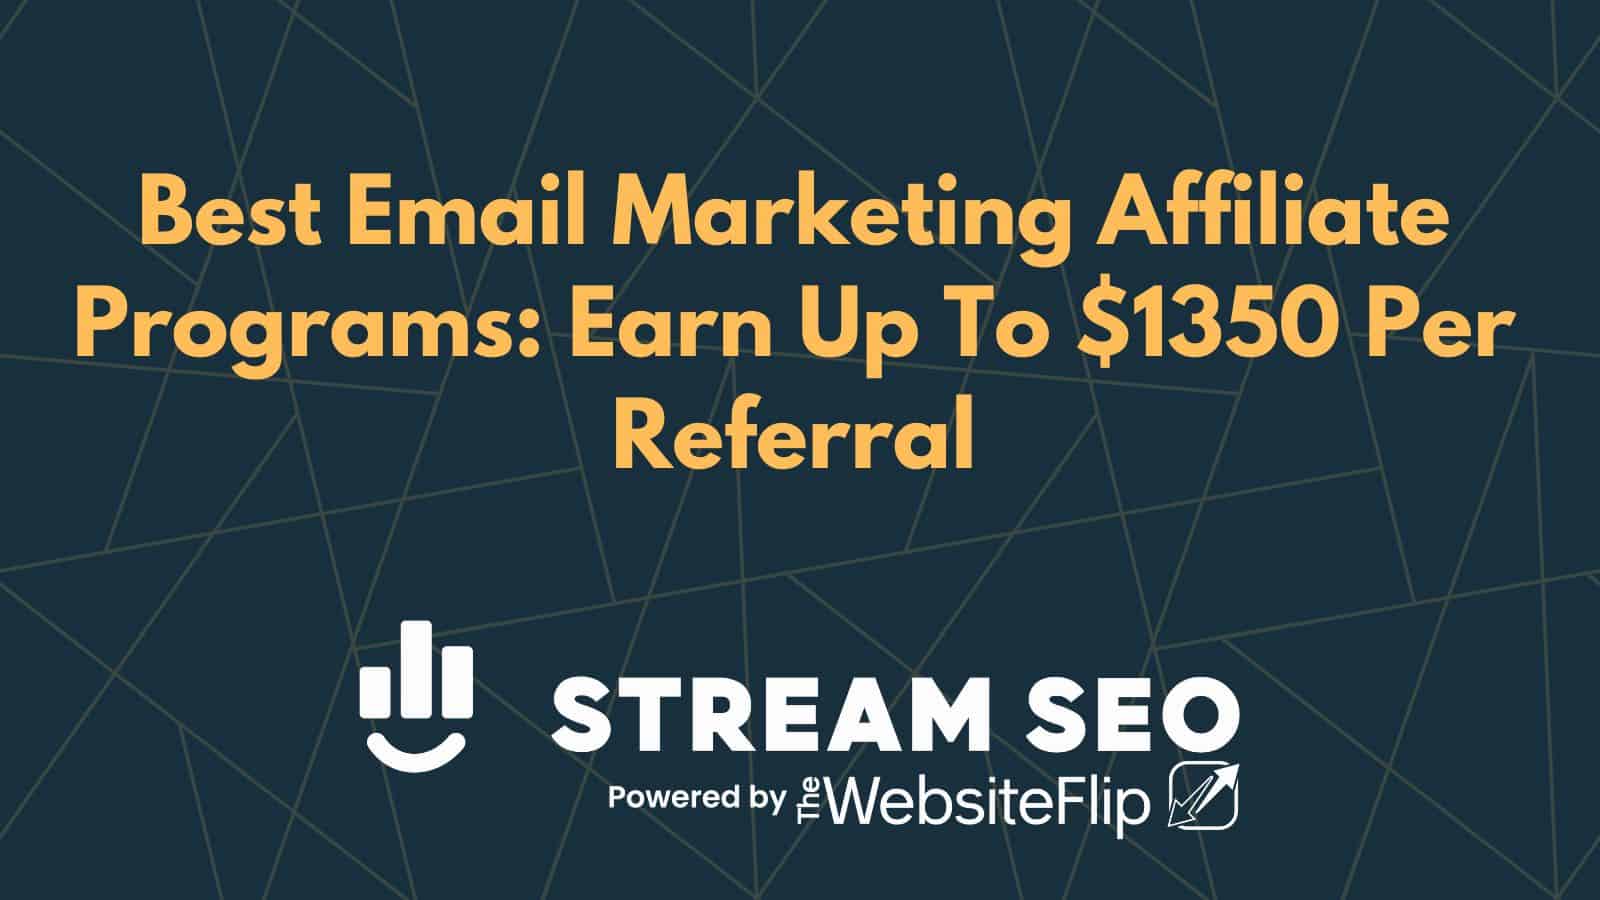 Best Email Marketing Affiliate Programs: Earn Up To $1350 Per Referral